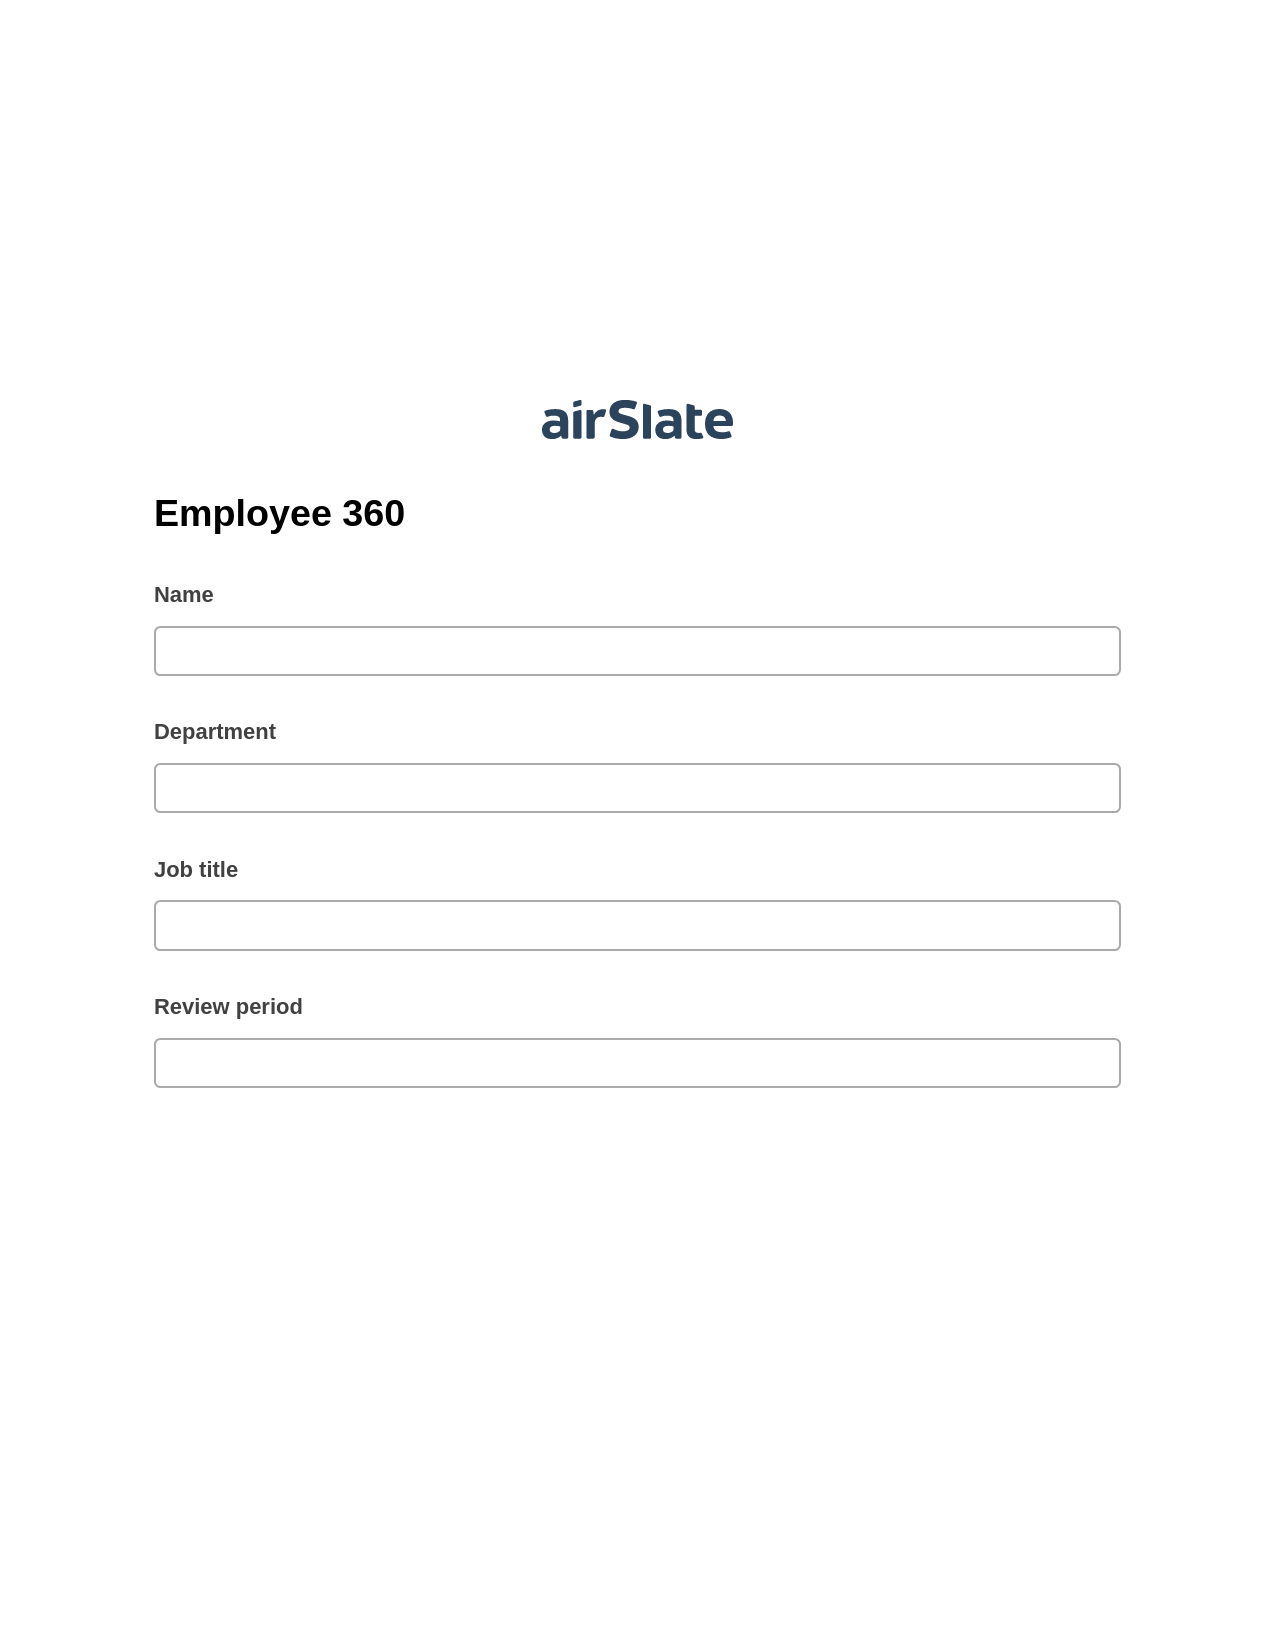 Multirole Employee 360 Pre-fill from Salesforce Records with SOQL Bot, Export to MS Dynamics 365 Bot, Export to WebMerge Bot